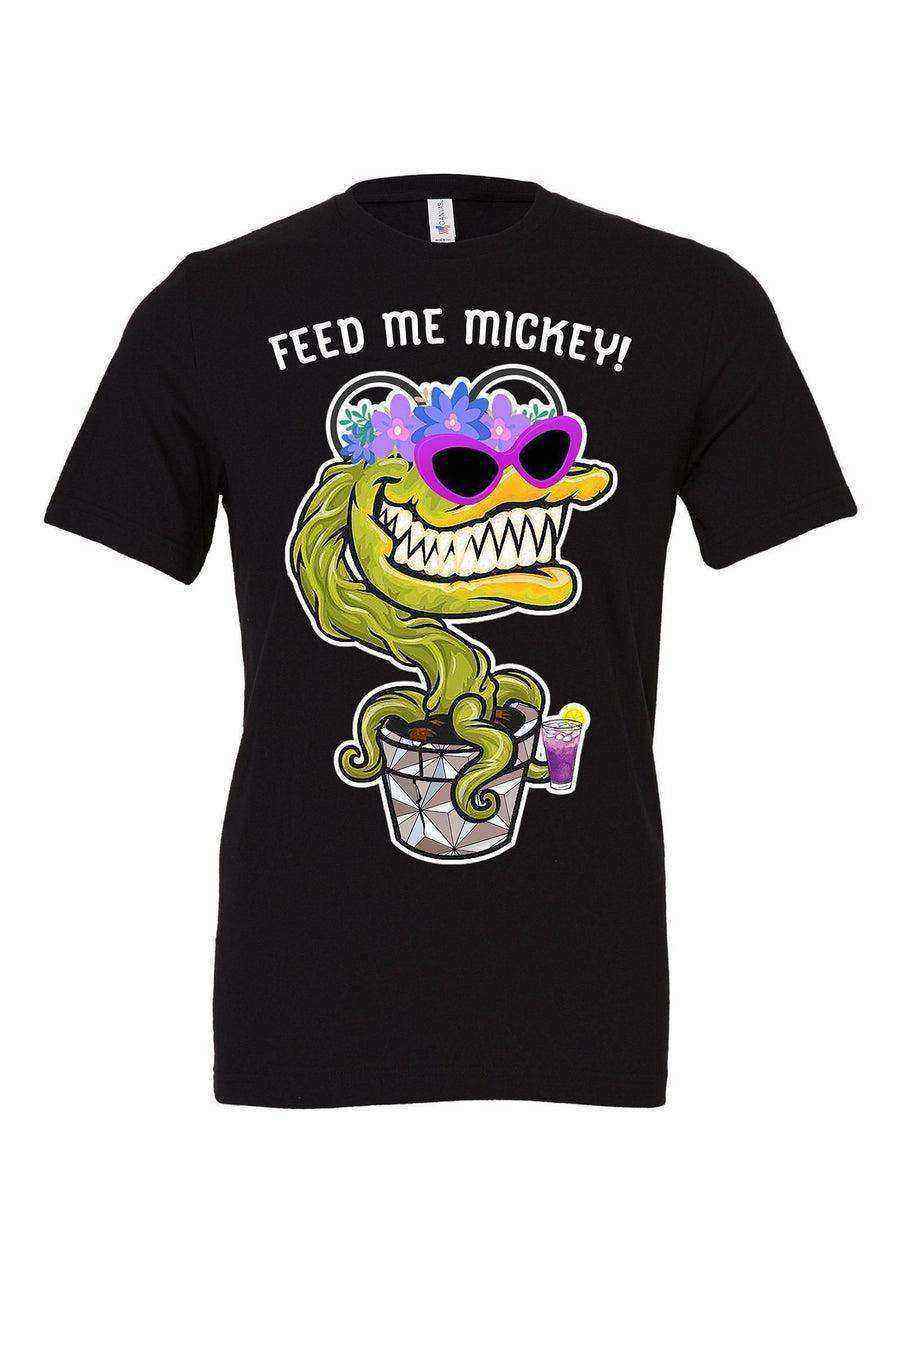 Youth | Feed Me Mickey Shirt | Little Shop Of Horrors Shirt - Dylan's Tees